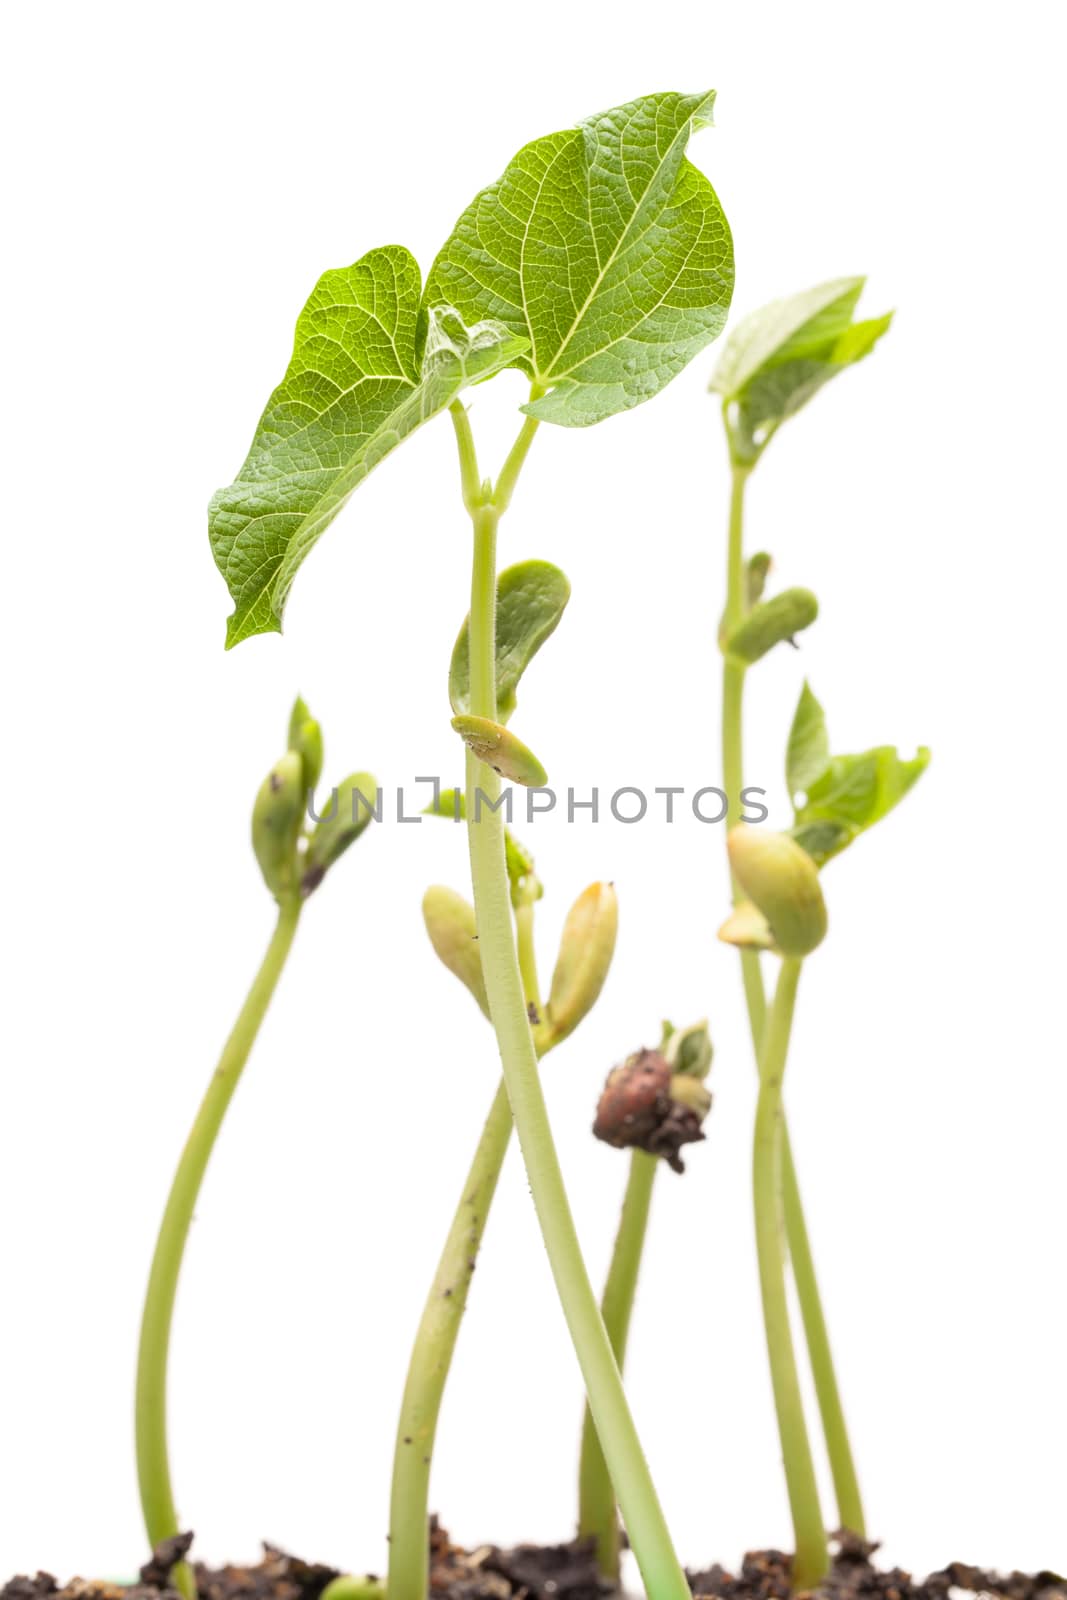 Growing beans plants over white backround